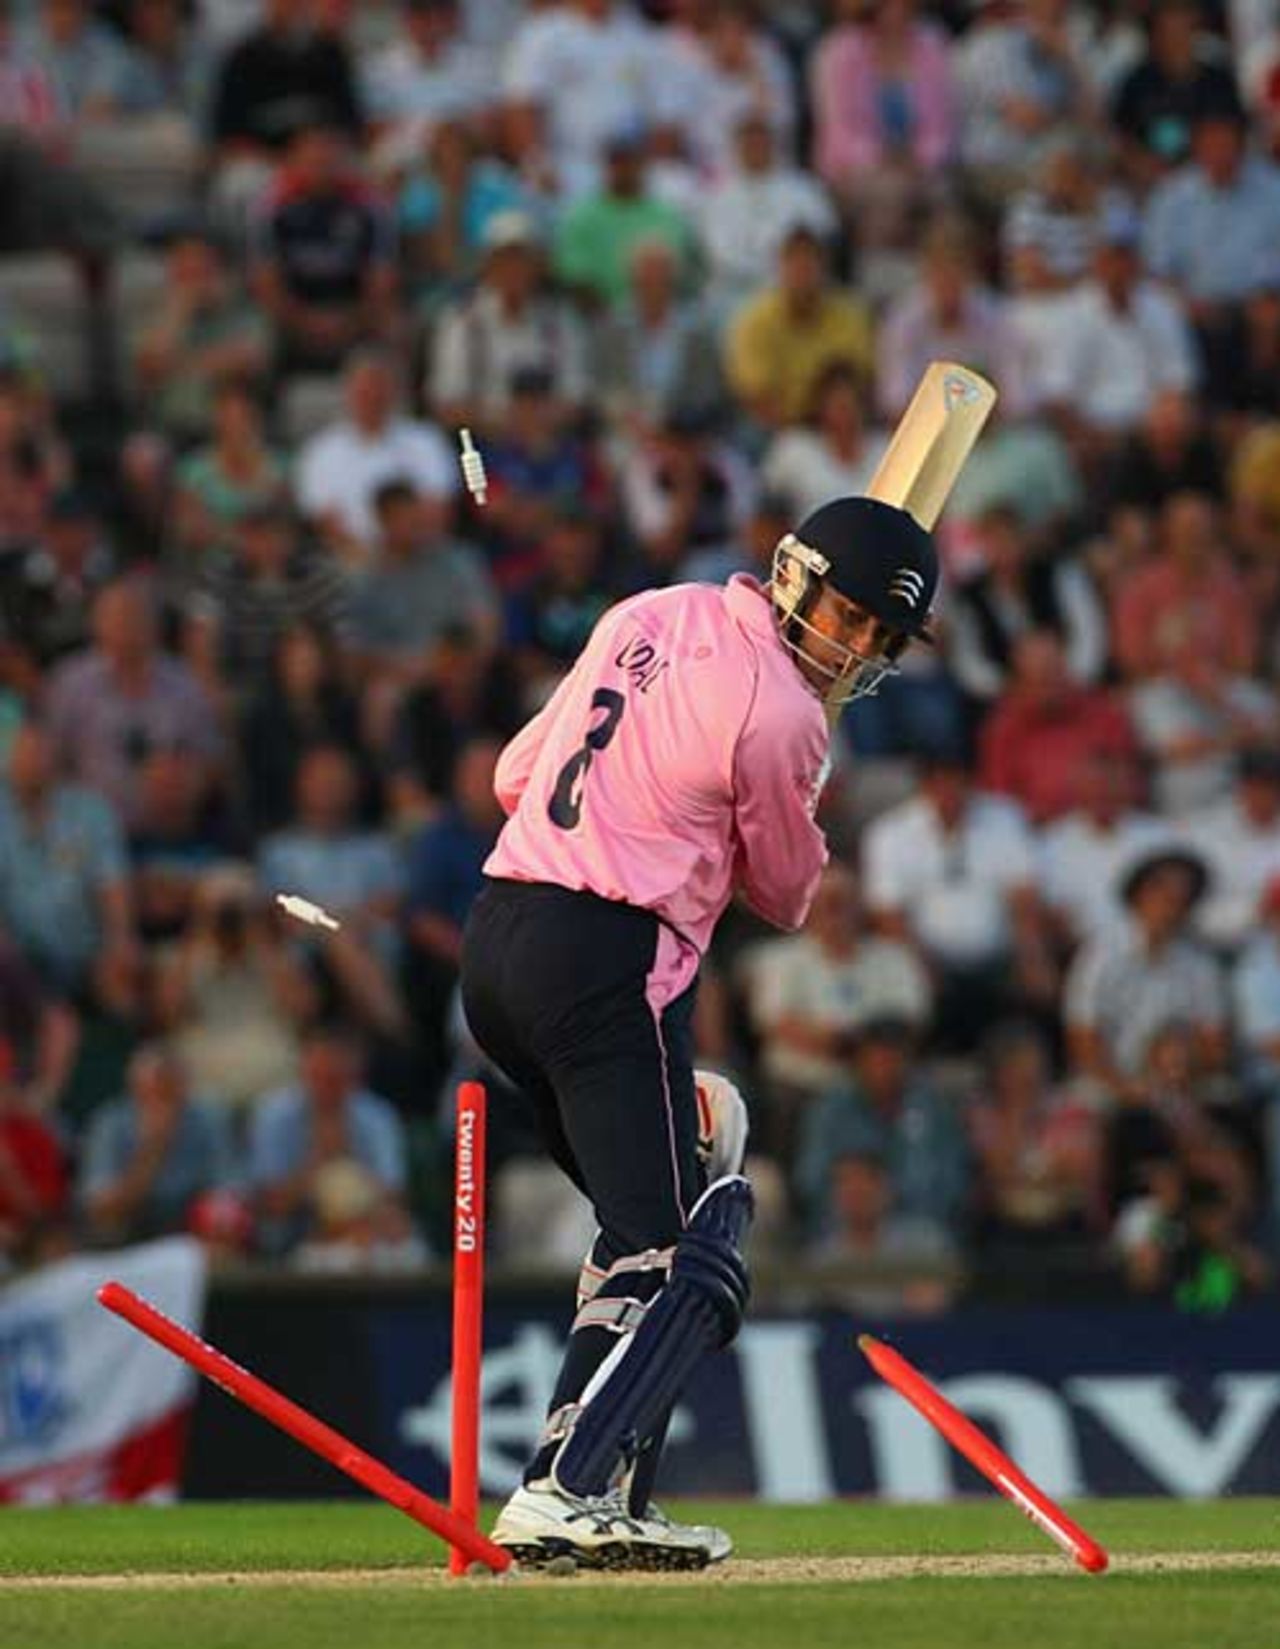 Shaun Udal is no match for Yasir Arafat's yorker, Kent v Middlesex, Twenty20 Cup final, The Rose Bowl, July 26, 2008